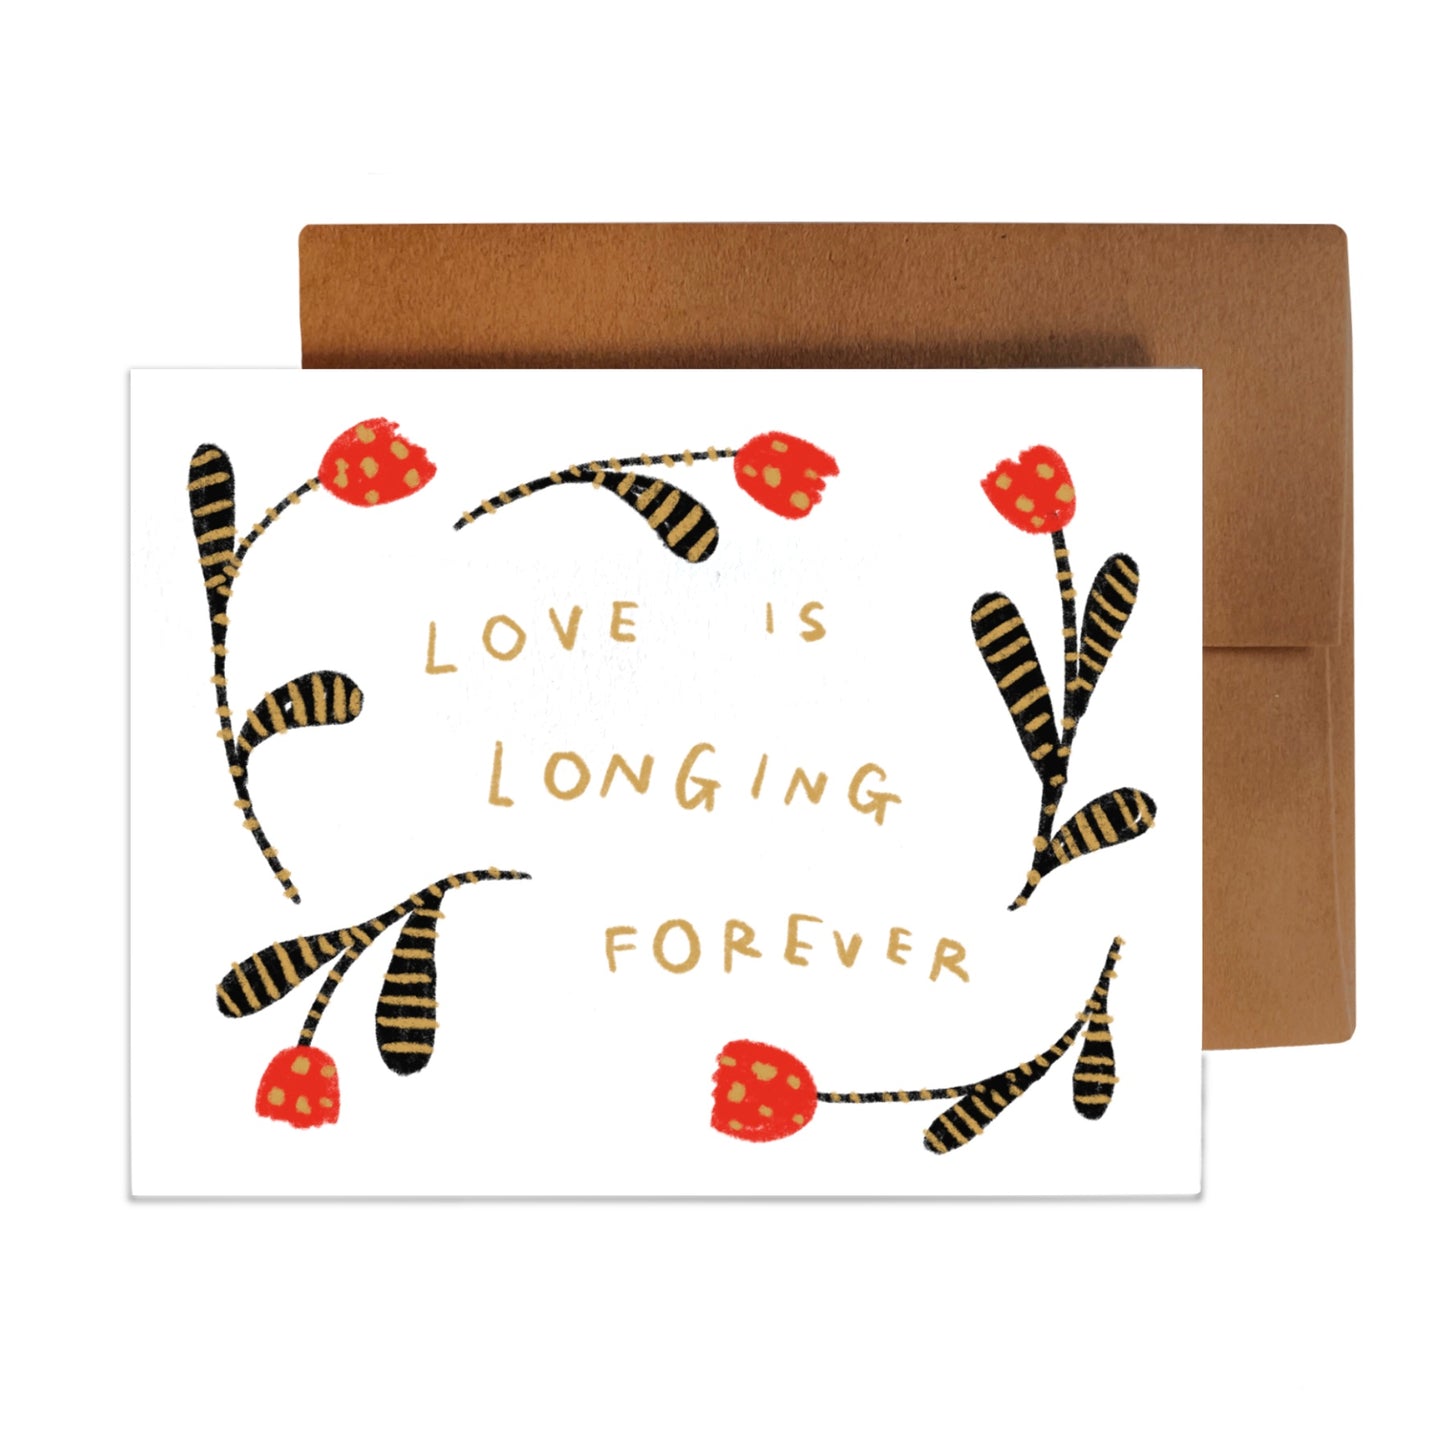 LOVE IS LONGING FOREVER card ~ Amy Lin X Rani Ban